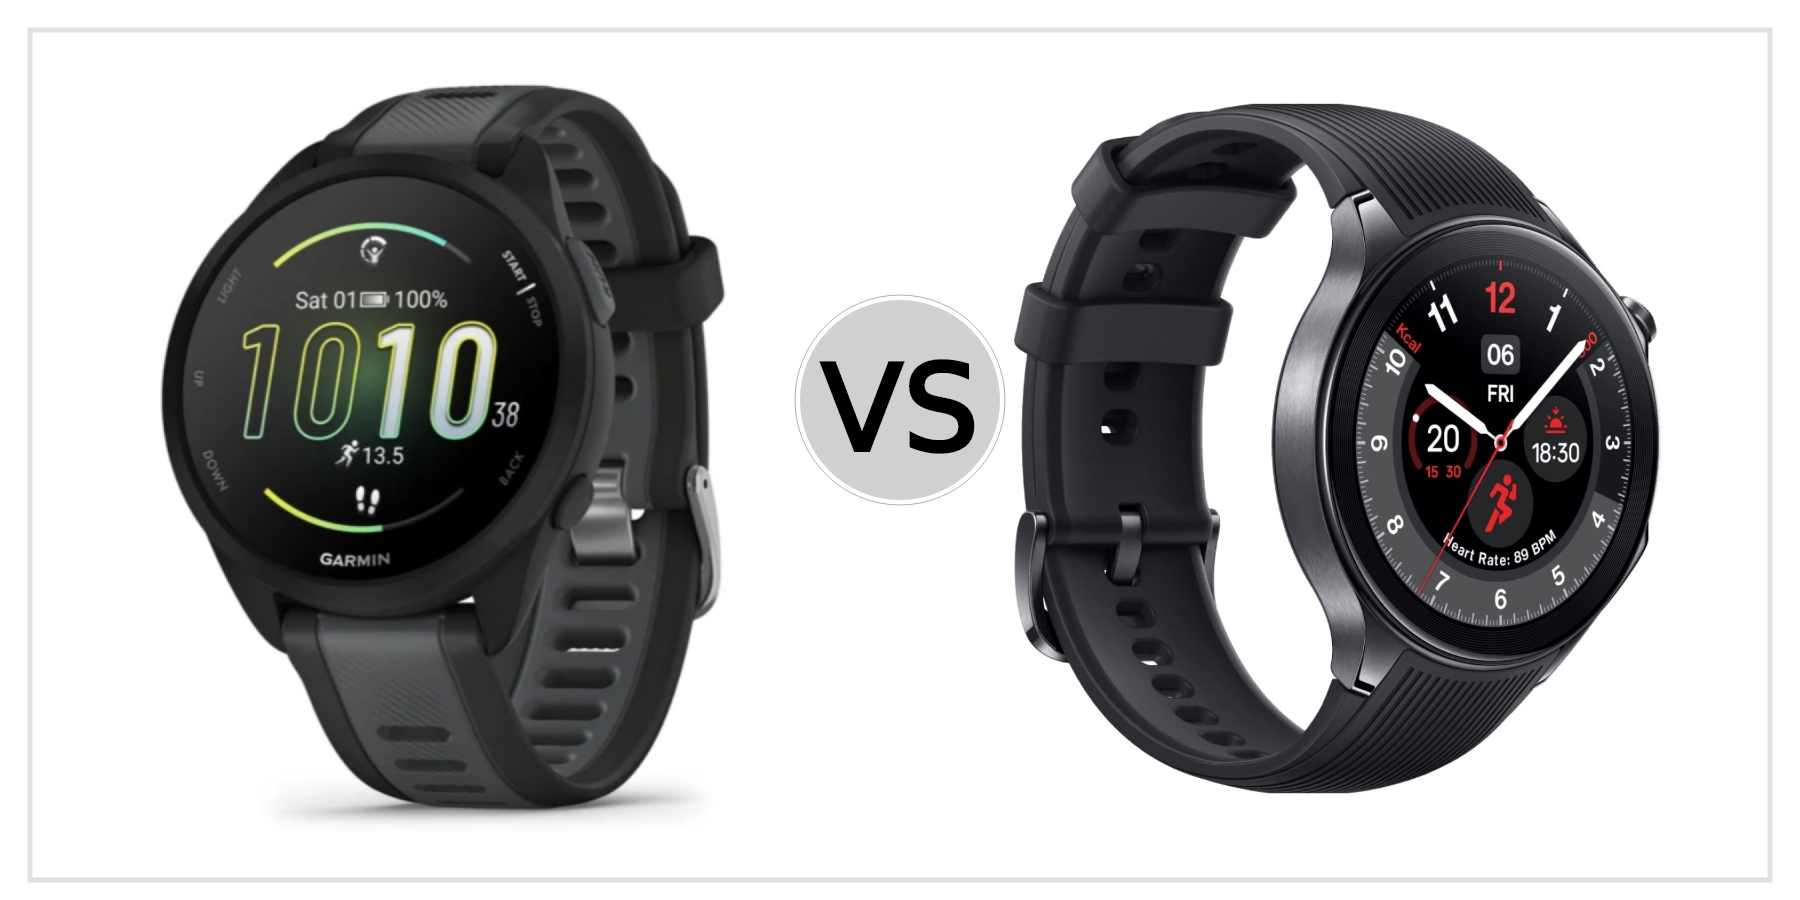 Compare Garmin Forerunner 165 VS OnePlus Watch 2 to see which is better